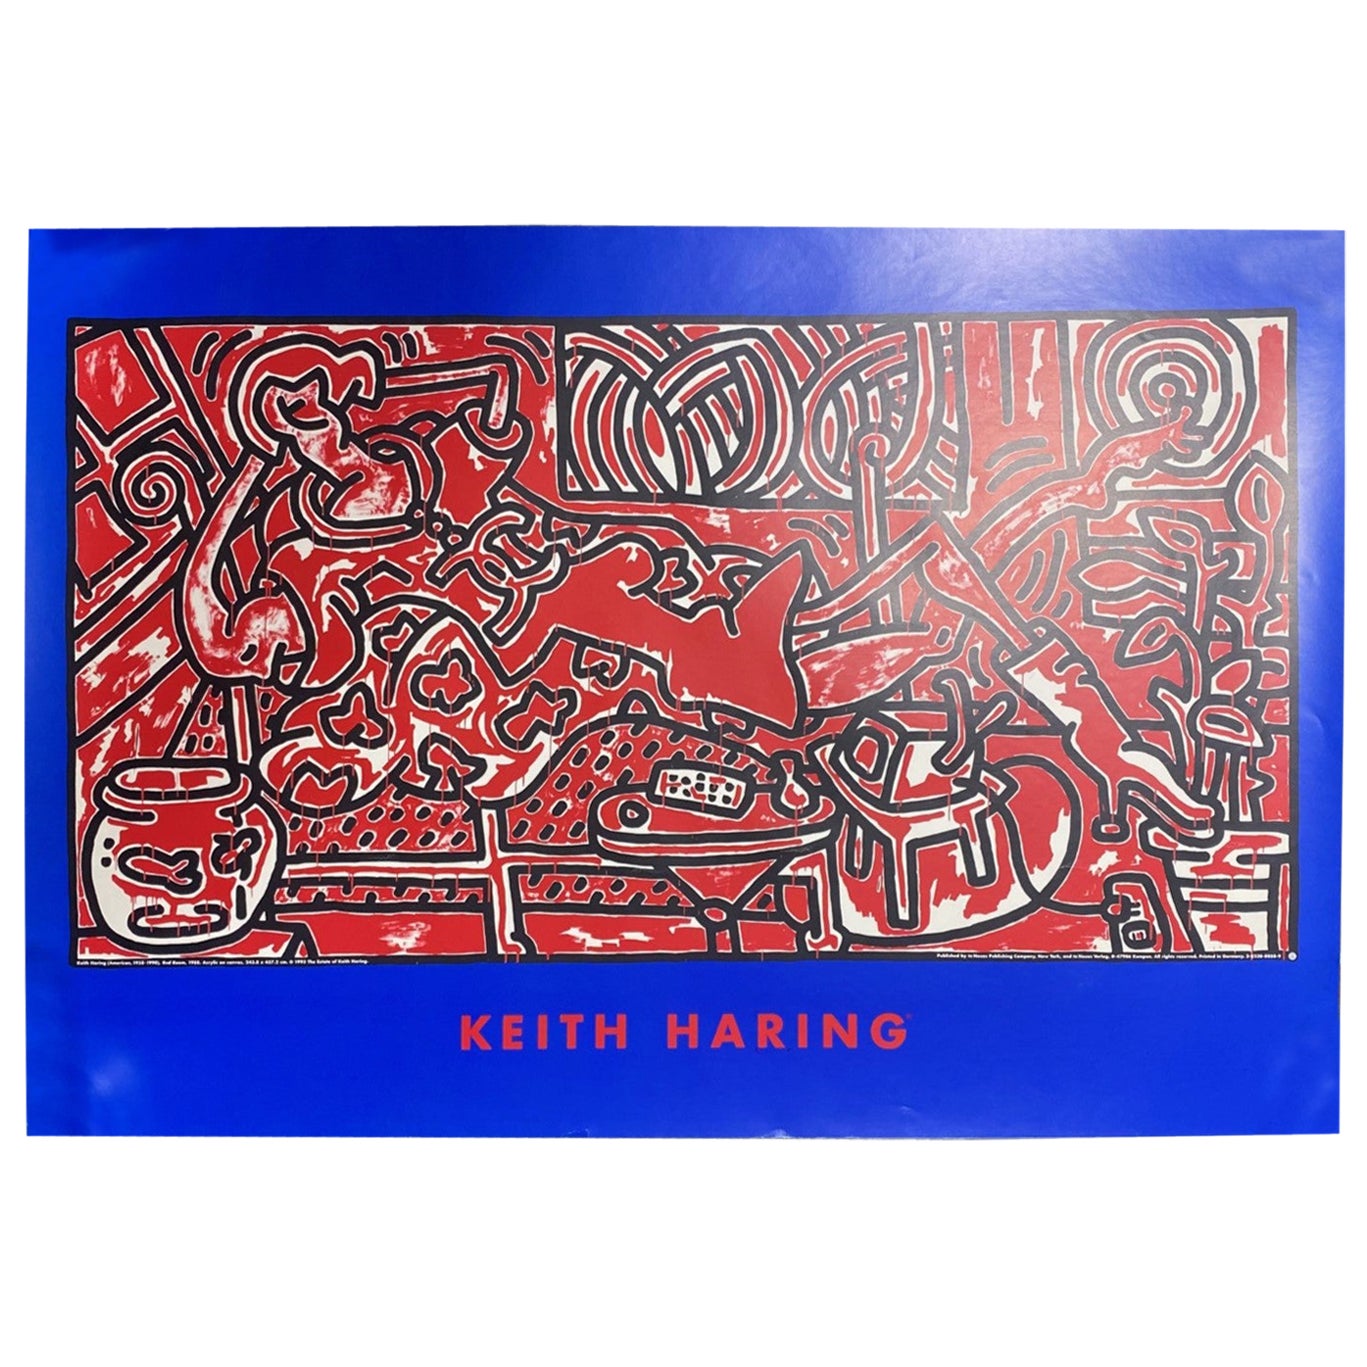 Keith Haring Vintage NYC Pop Shop te Neues Art Lithograph Poster Red Room, 1993 For Sale